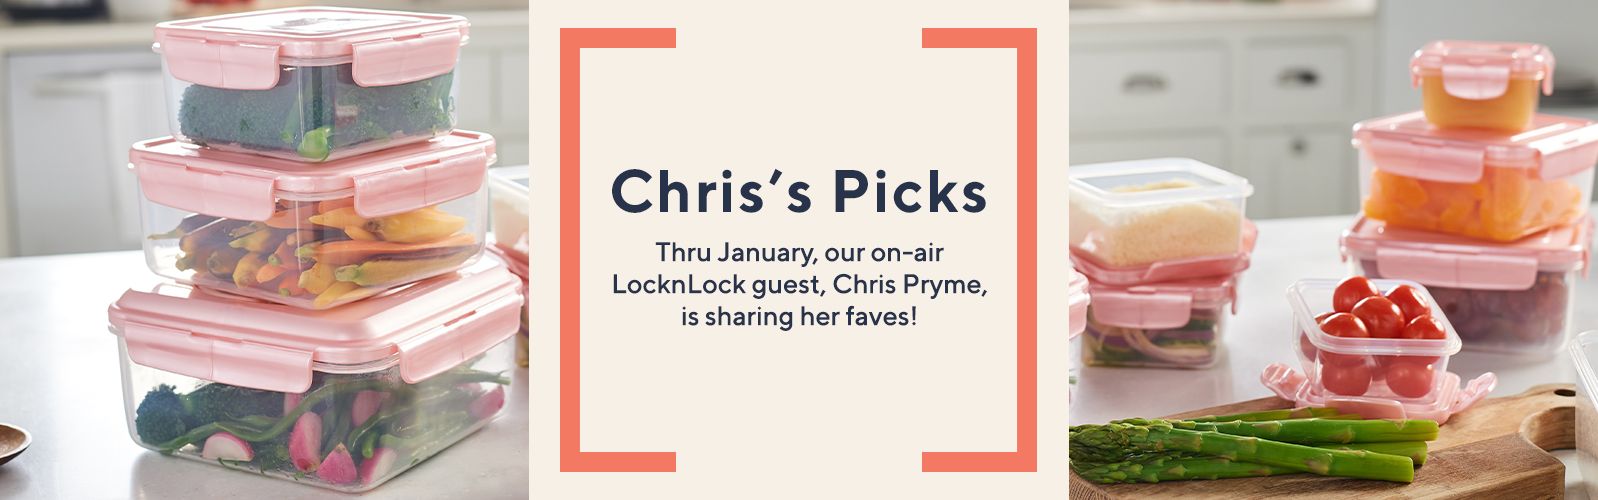 Chris's Picks Thru January, our on-air LocknLock guest, Chris Pryme, is sharing her faves